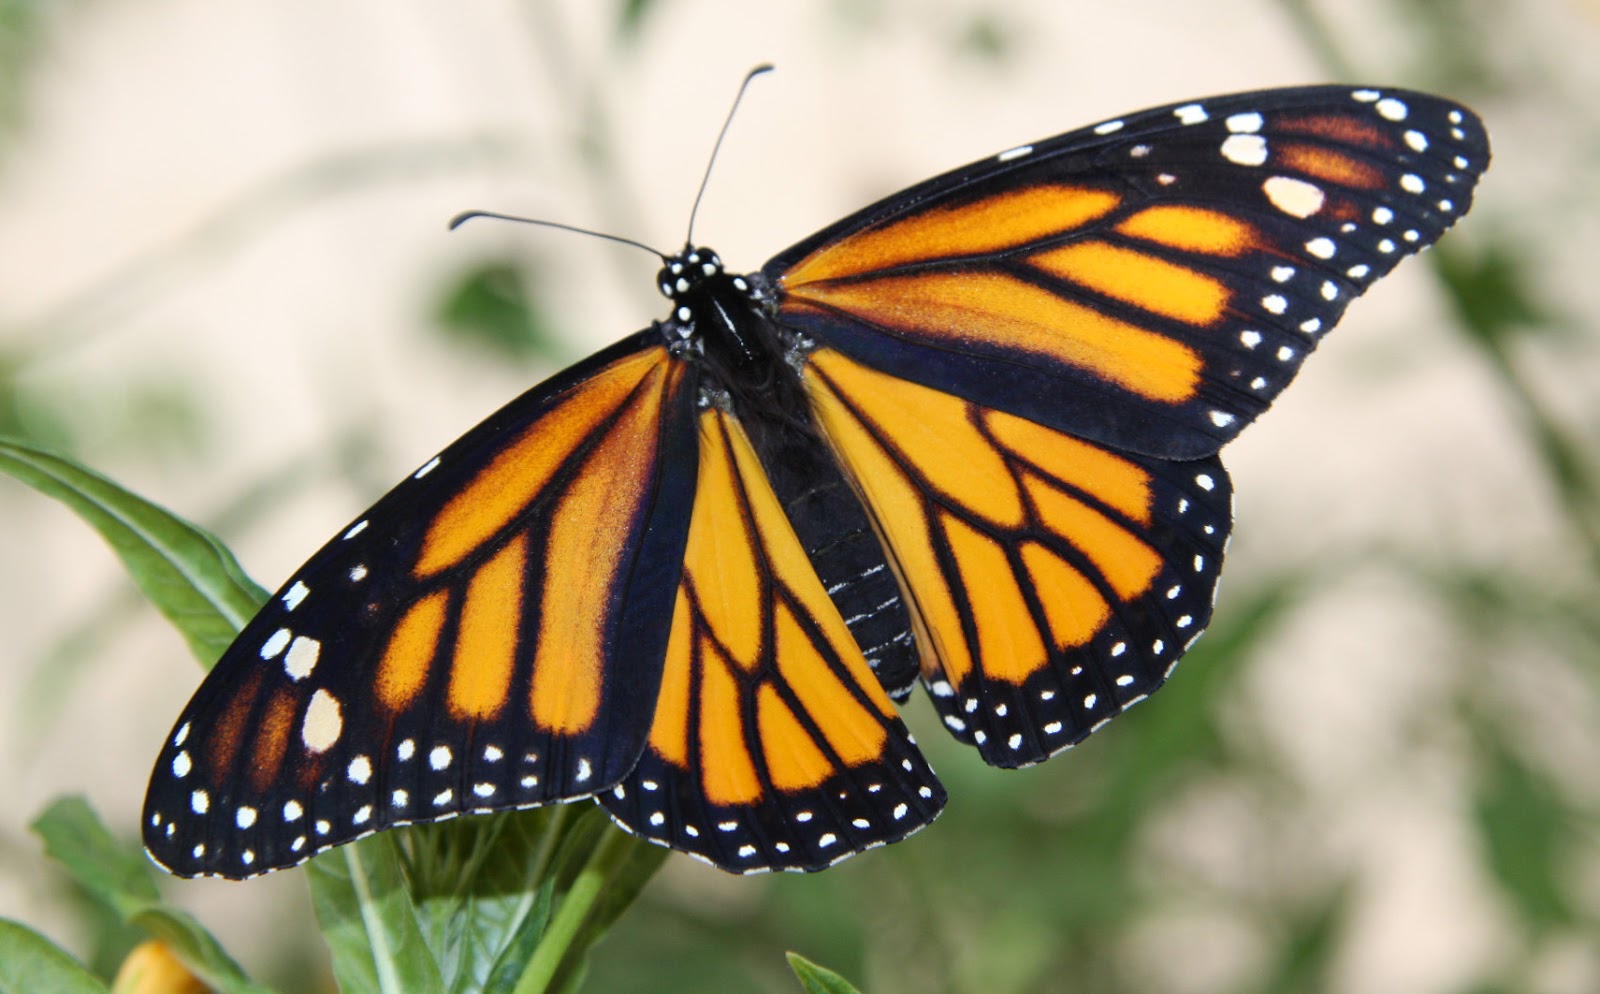 My Monarch Guide Monarch Butterfly Milkweed Mania Is My